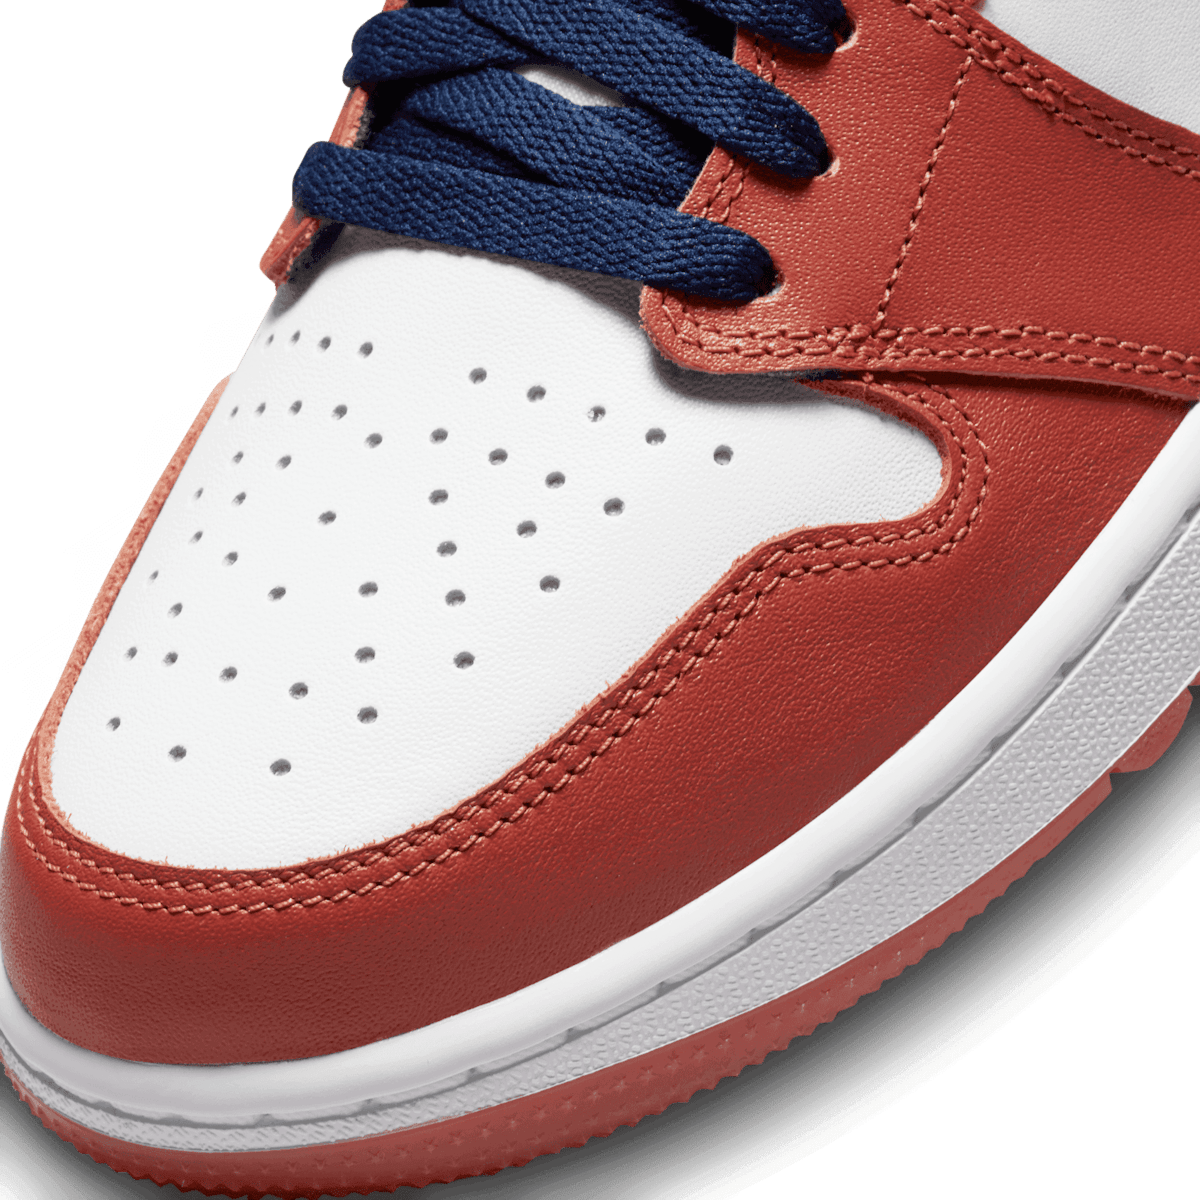 Jordan 1 High Eastside Golf Out of the Mud Angle 4